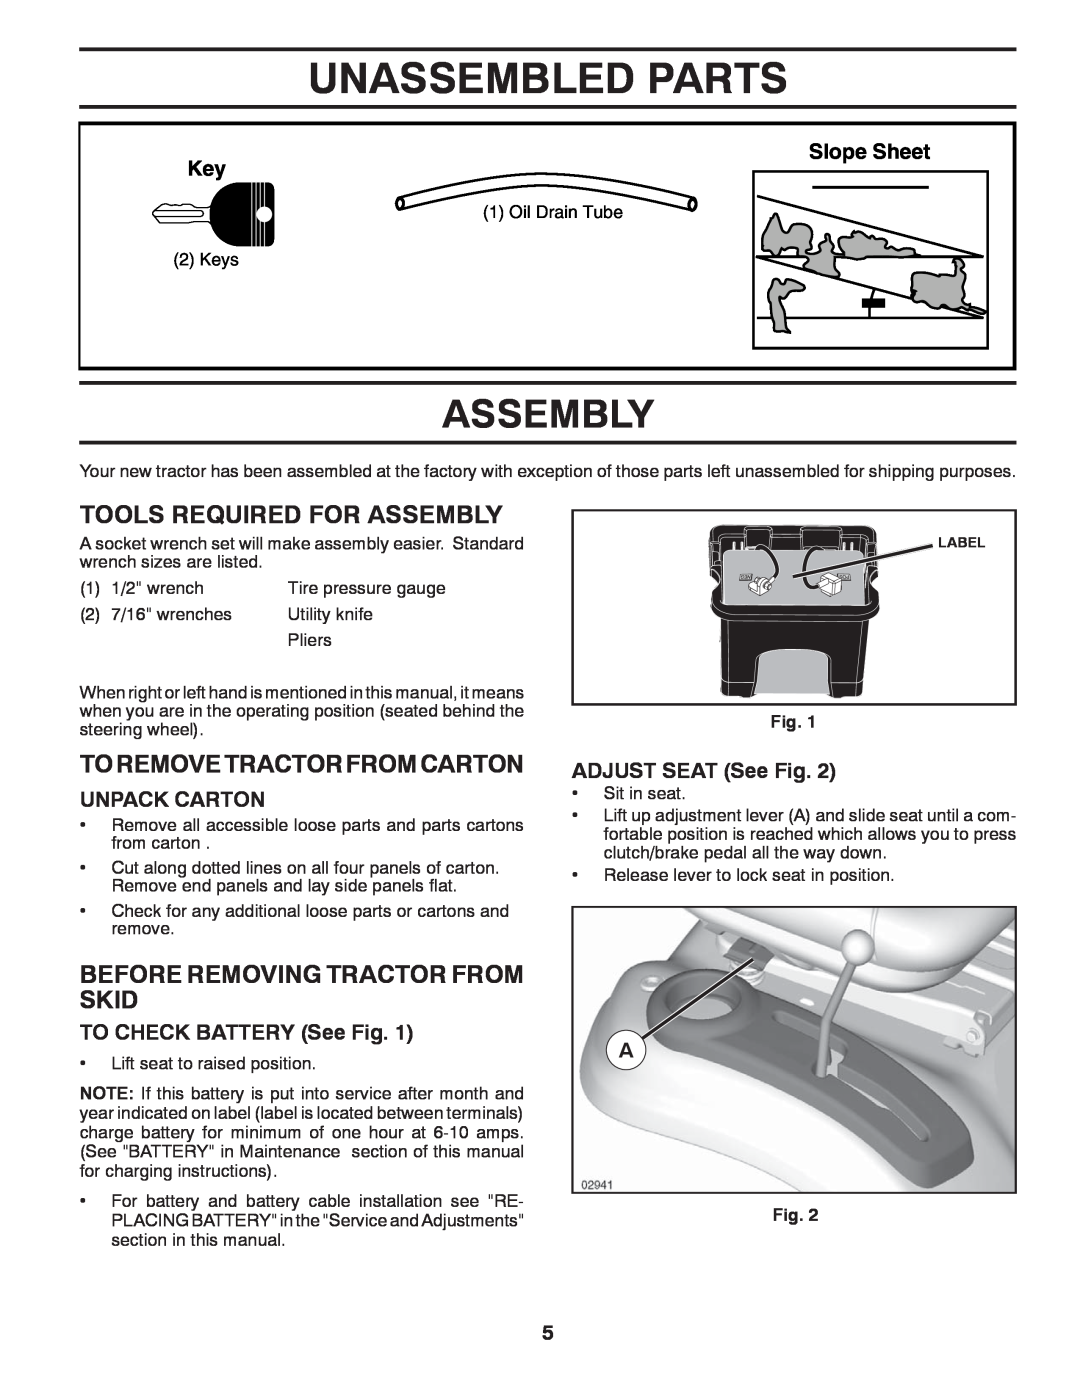 McCulloch MC2042YT Unassembled Parts, Tools Required For Assembly, To Remove Tractor From Carton, Slope Sheet Key 